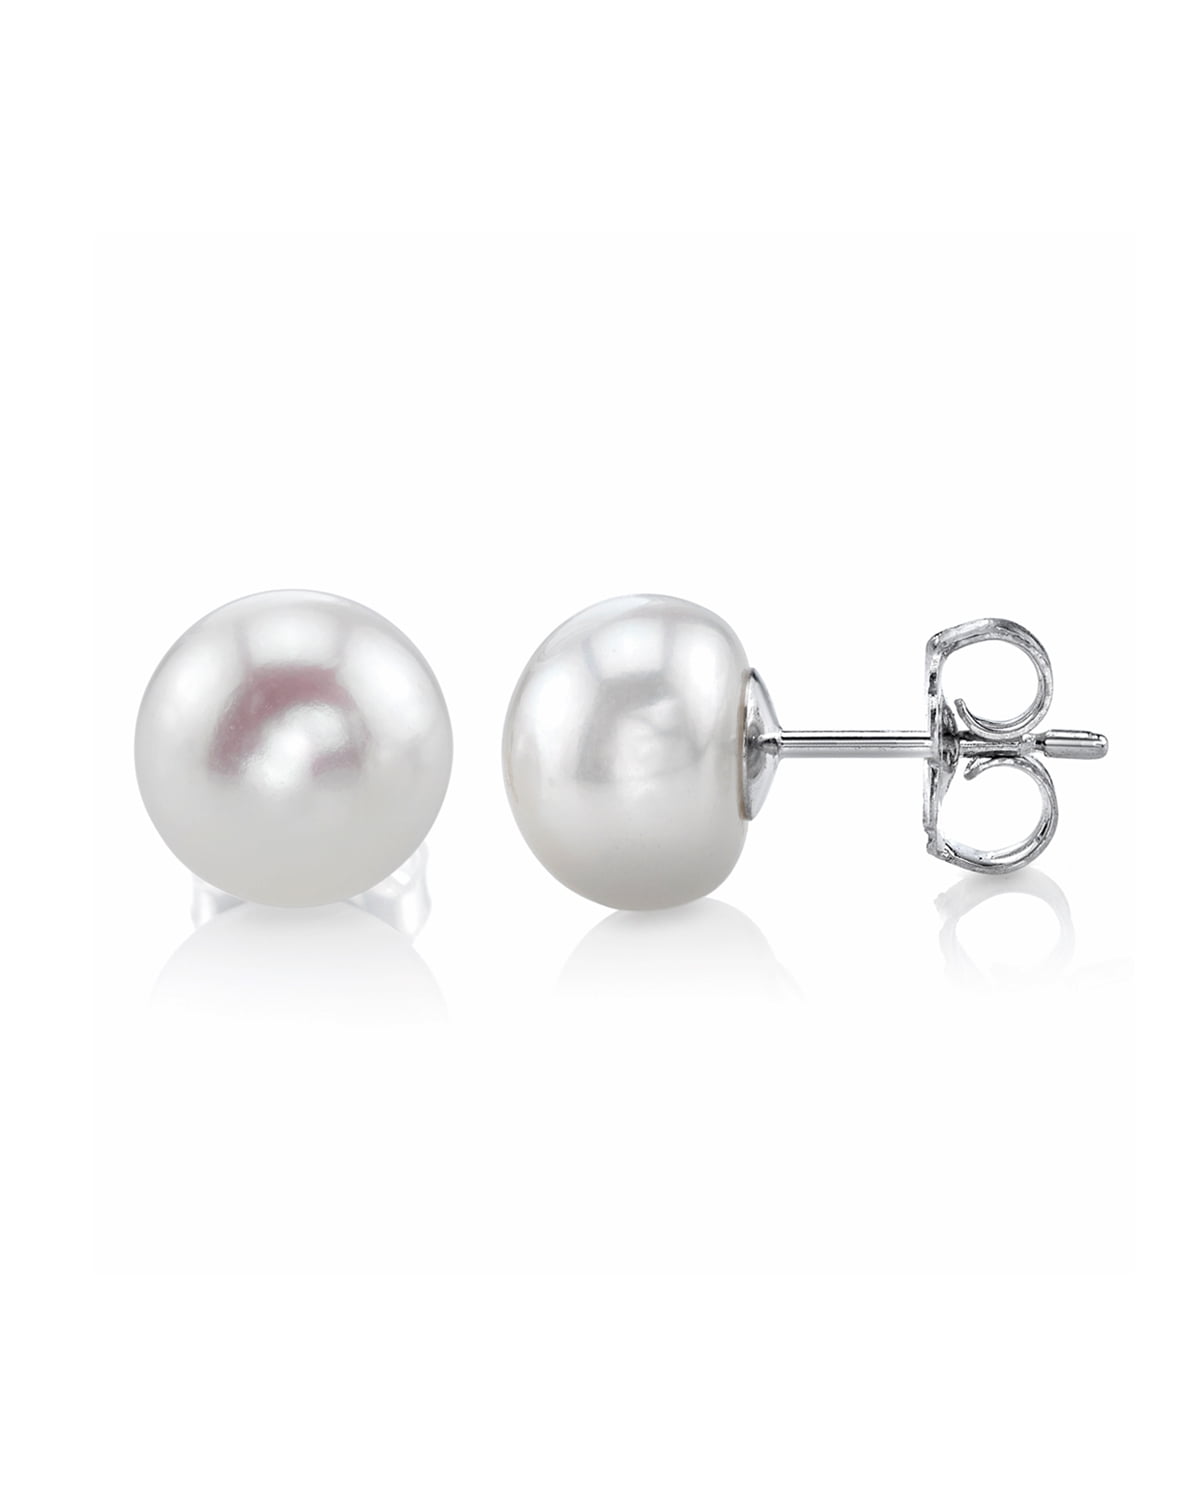 Handpicked 8.5-9mm Freshwater Cultured Pearls 925 Sterling Silver Stud Post Dangling Earrings CZ Halo